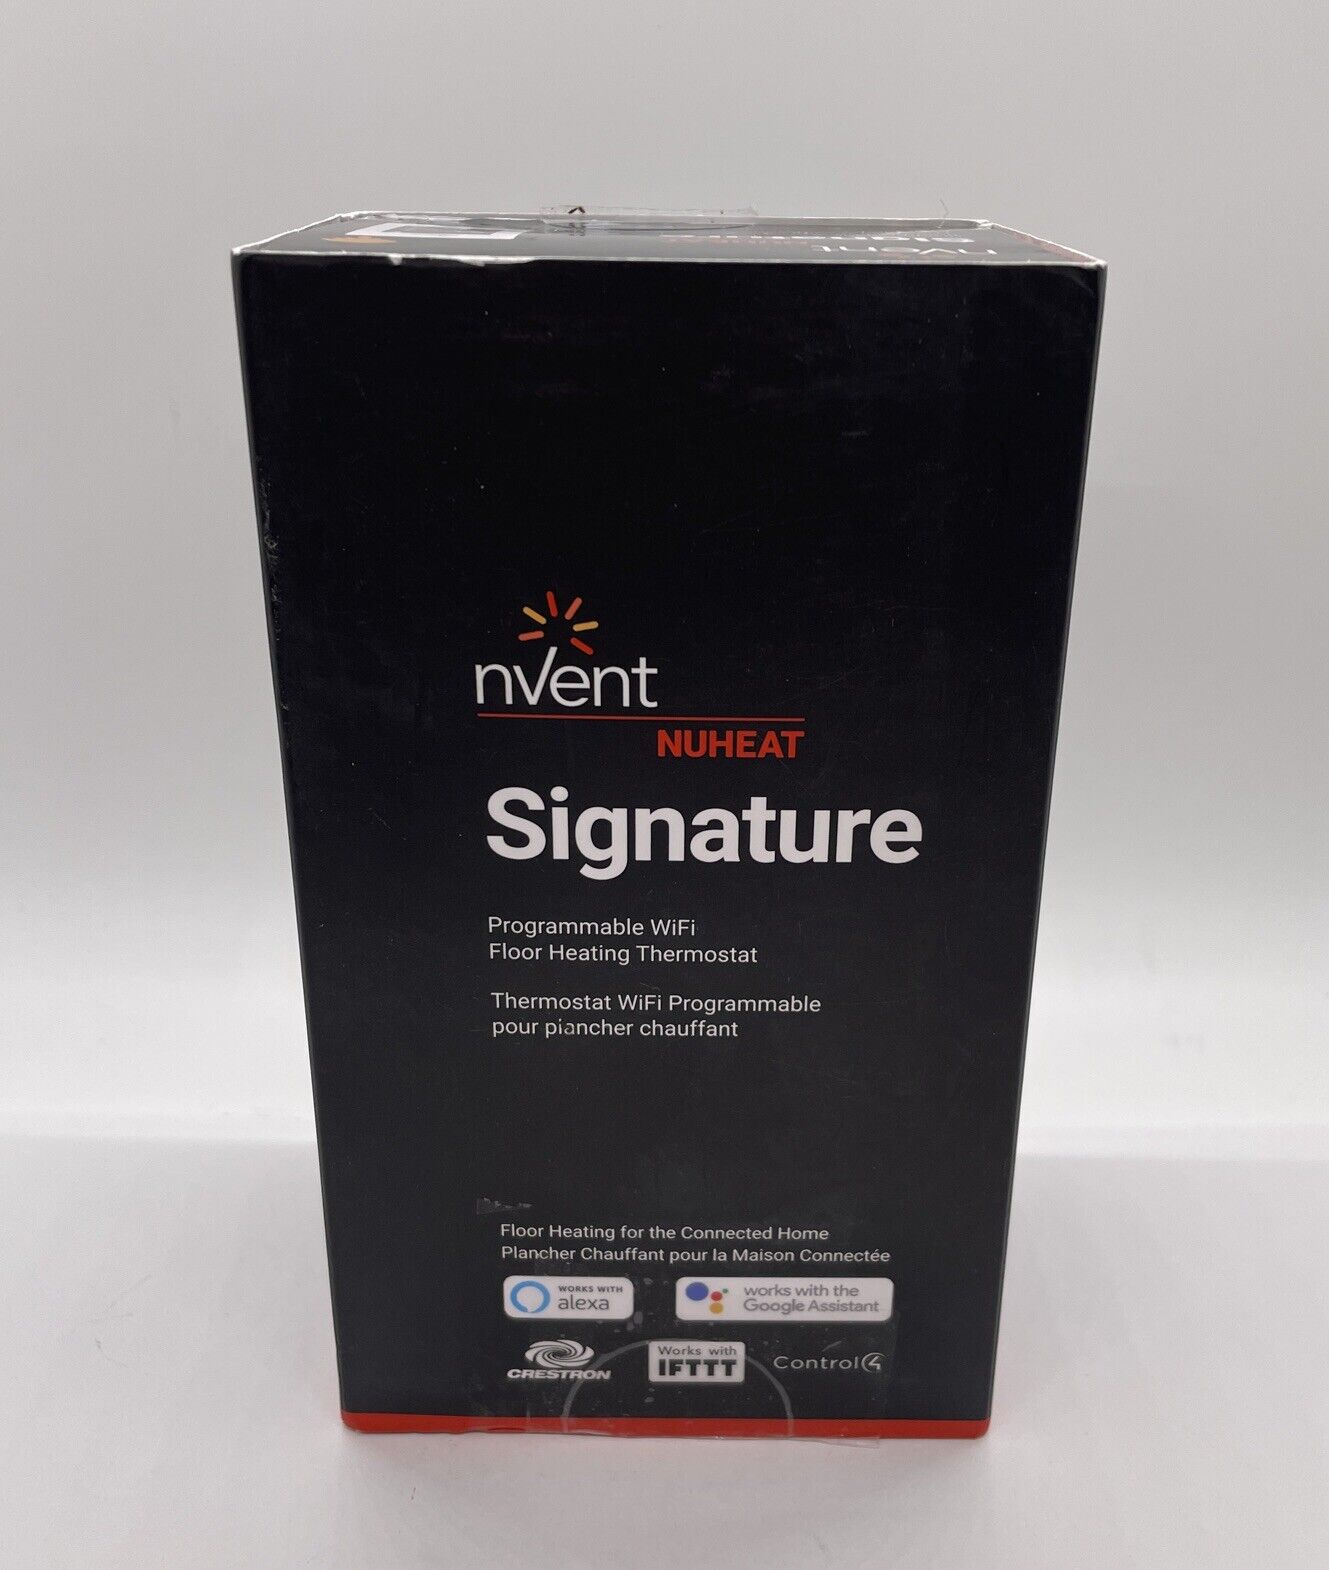 NuHeat nVent AC0055 SIGNATURE WiFi Touchscreen Programmable Heating Thermostat